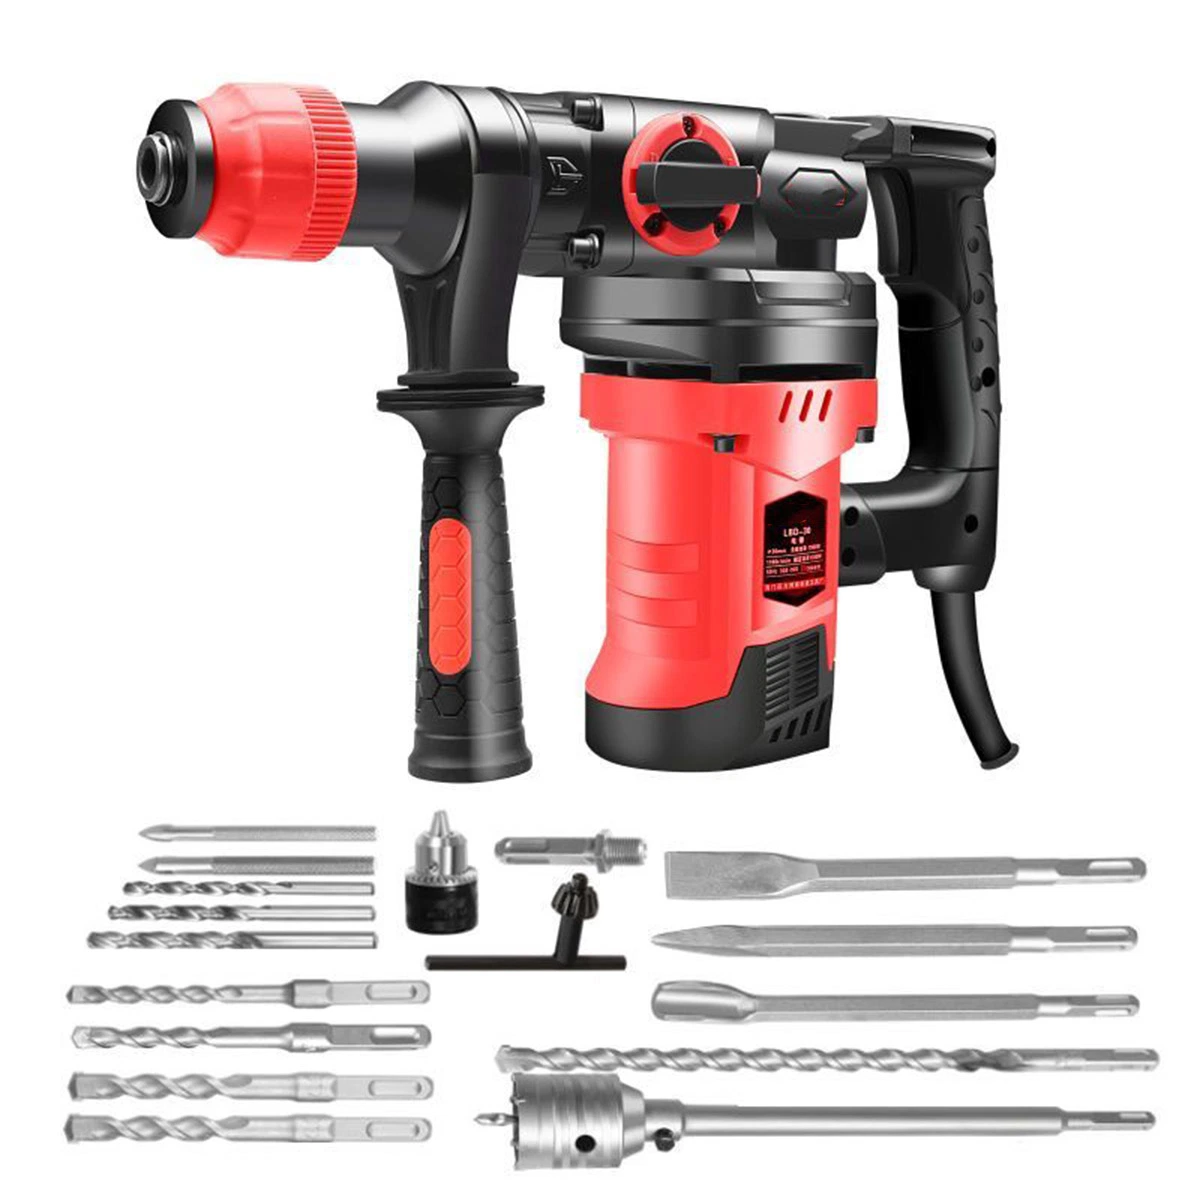 26mm SDS Heavy Duty Electric Rotary Power Hammer Drill Machine